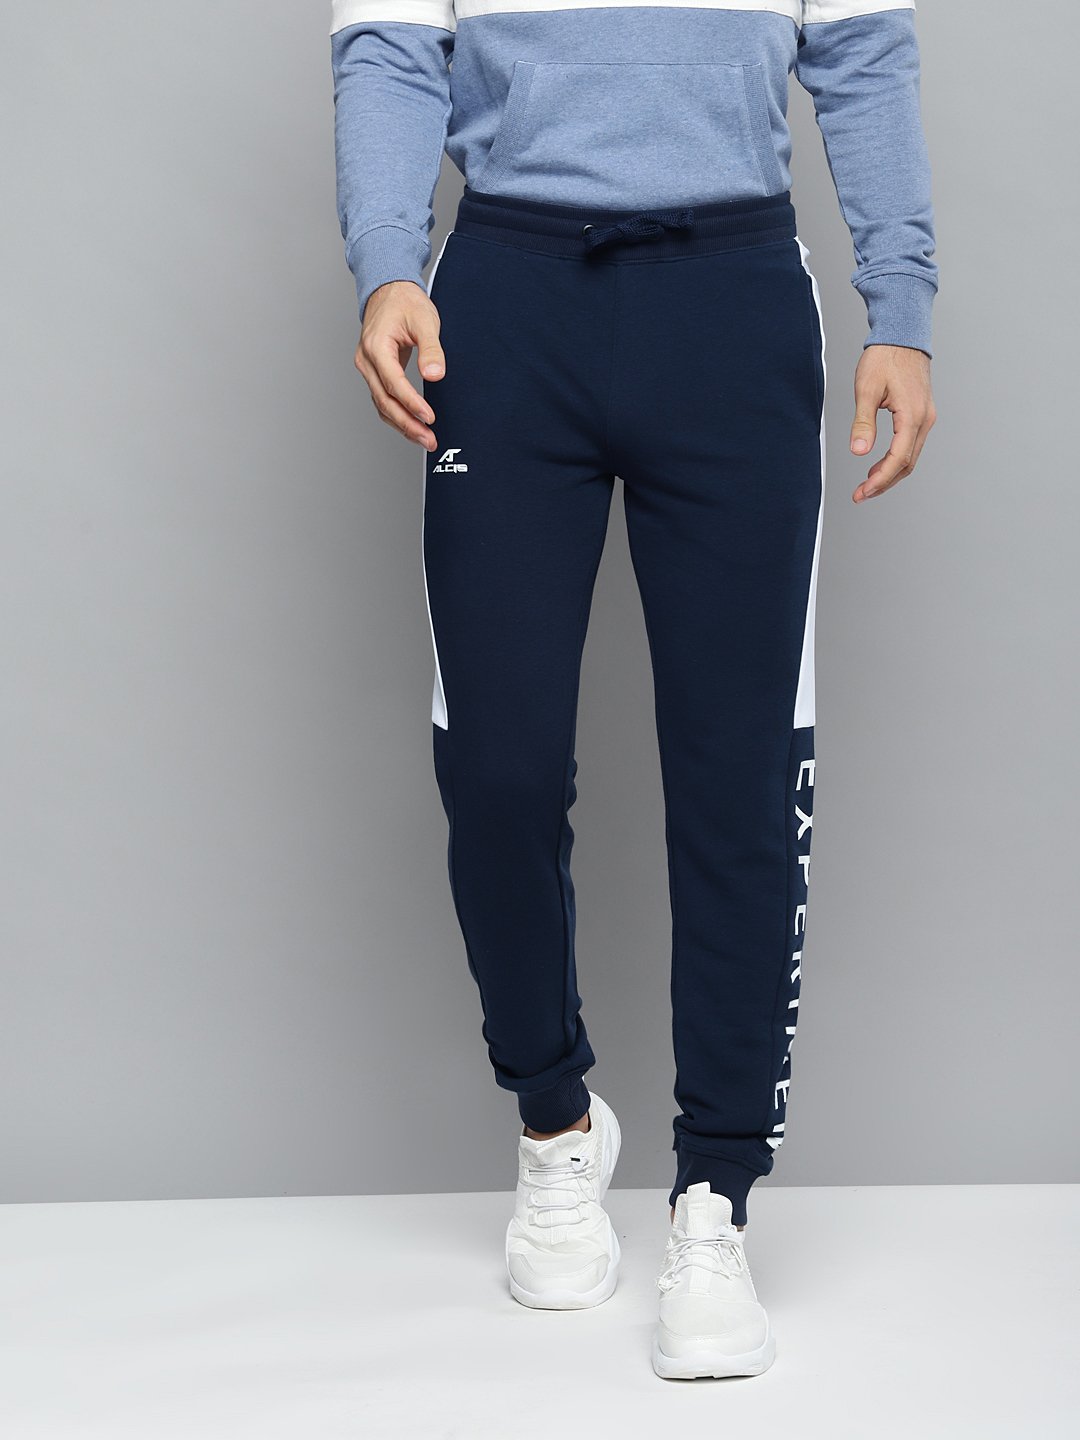 Alcis Men Navy Blue Solid Slim Fit Joggers with Printed Detail